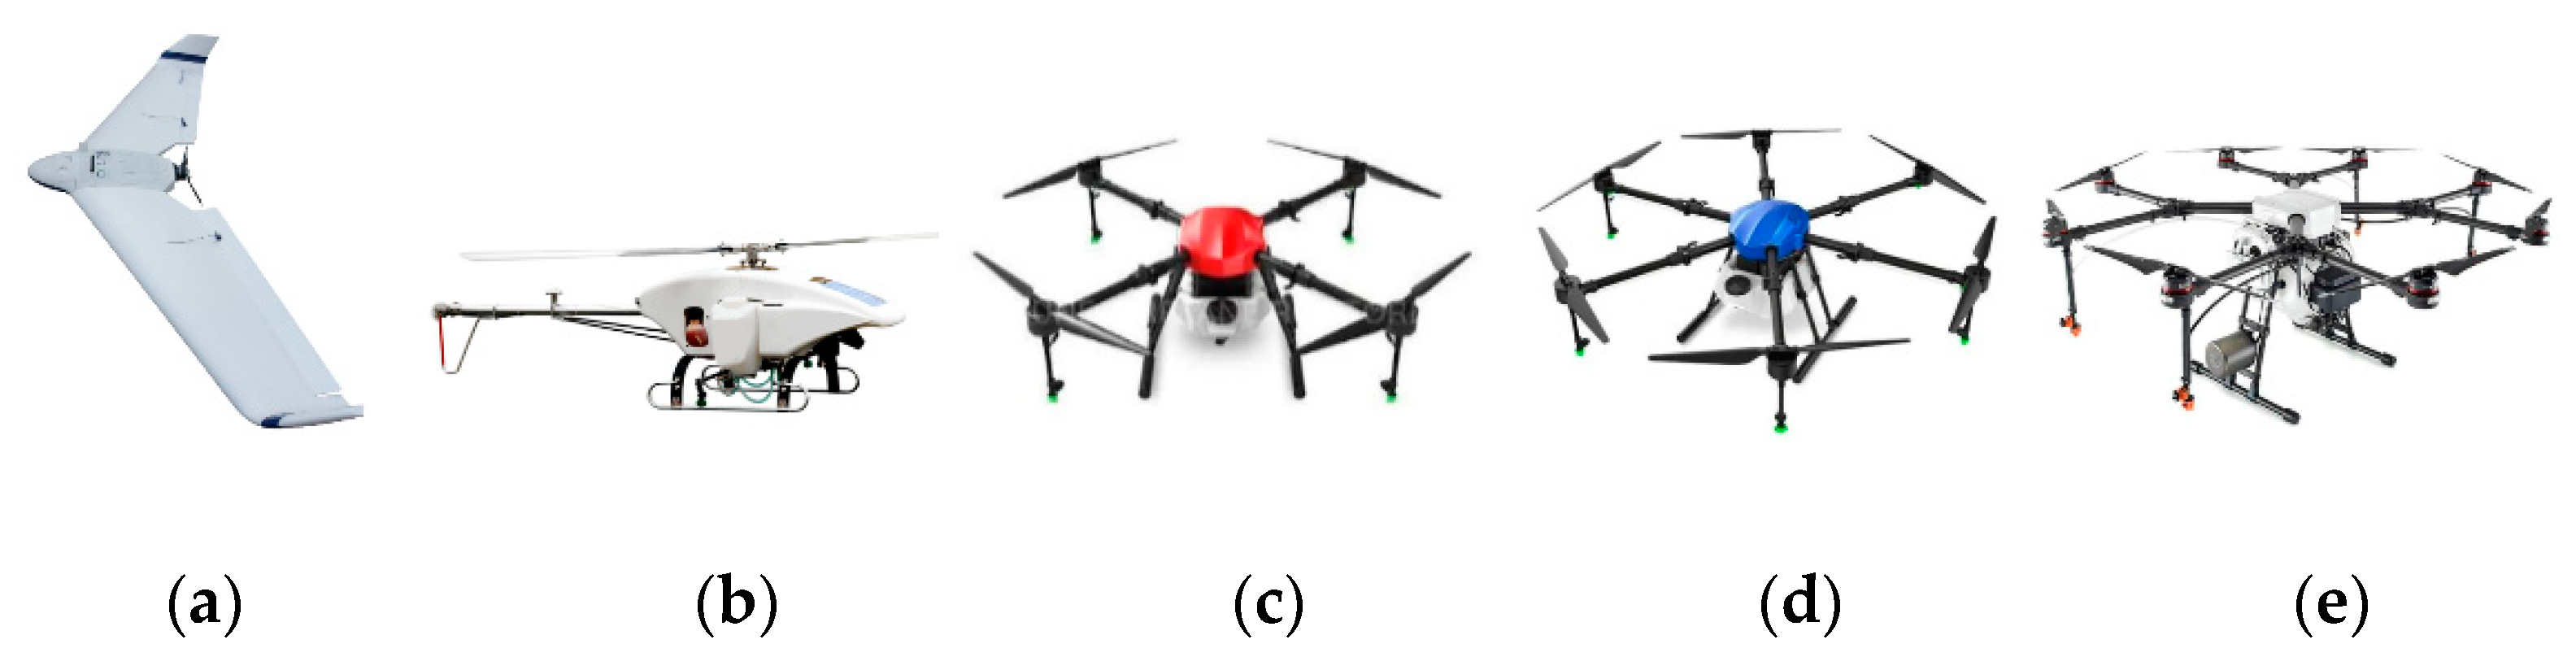 Drones | Free Full-Text | Independent Control Spraying System for UAV-Based  Precise Variable Sprayer: A Review